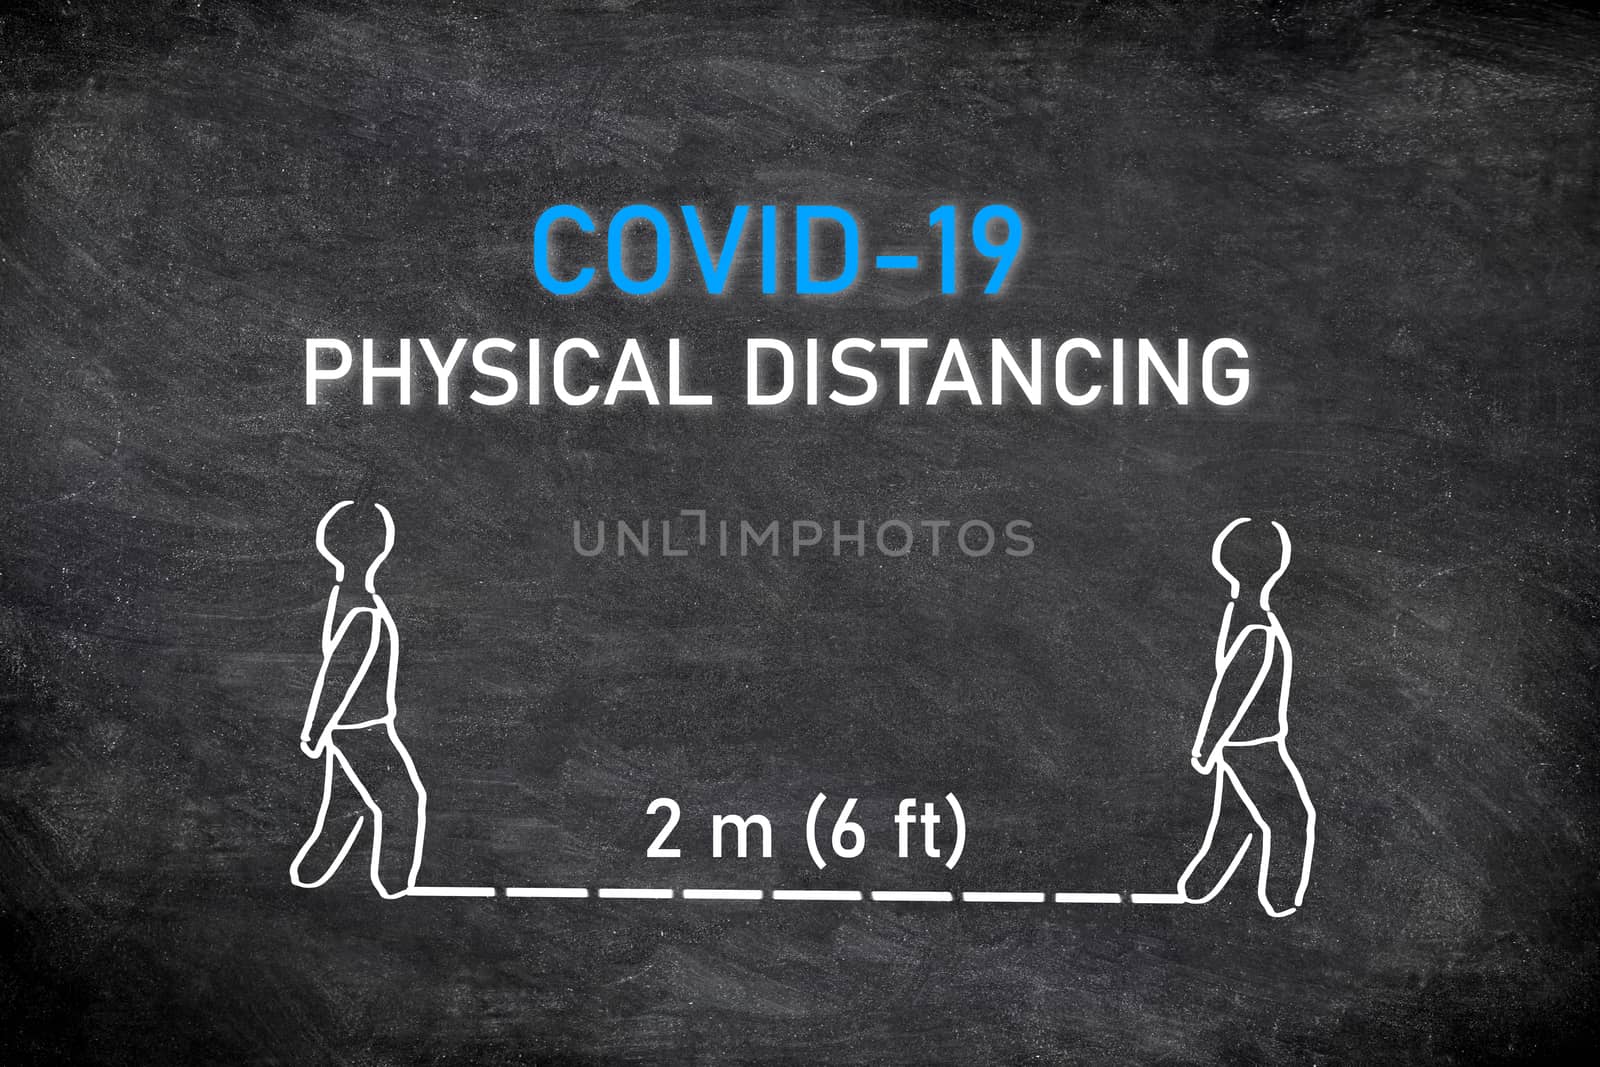 COVID-19 PHYSICAL DISTANCING instruction blackboard illustration. Maintain a distance of two meters or 6 feet between each person waiting in line at store or hospital.